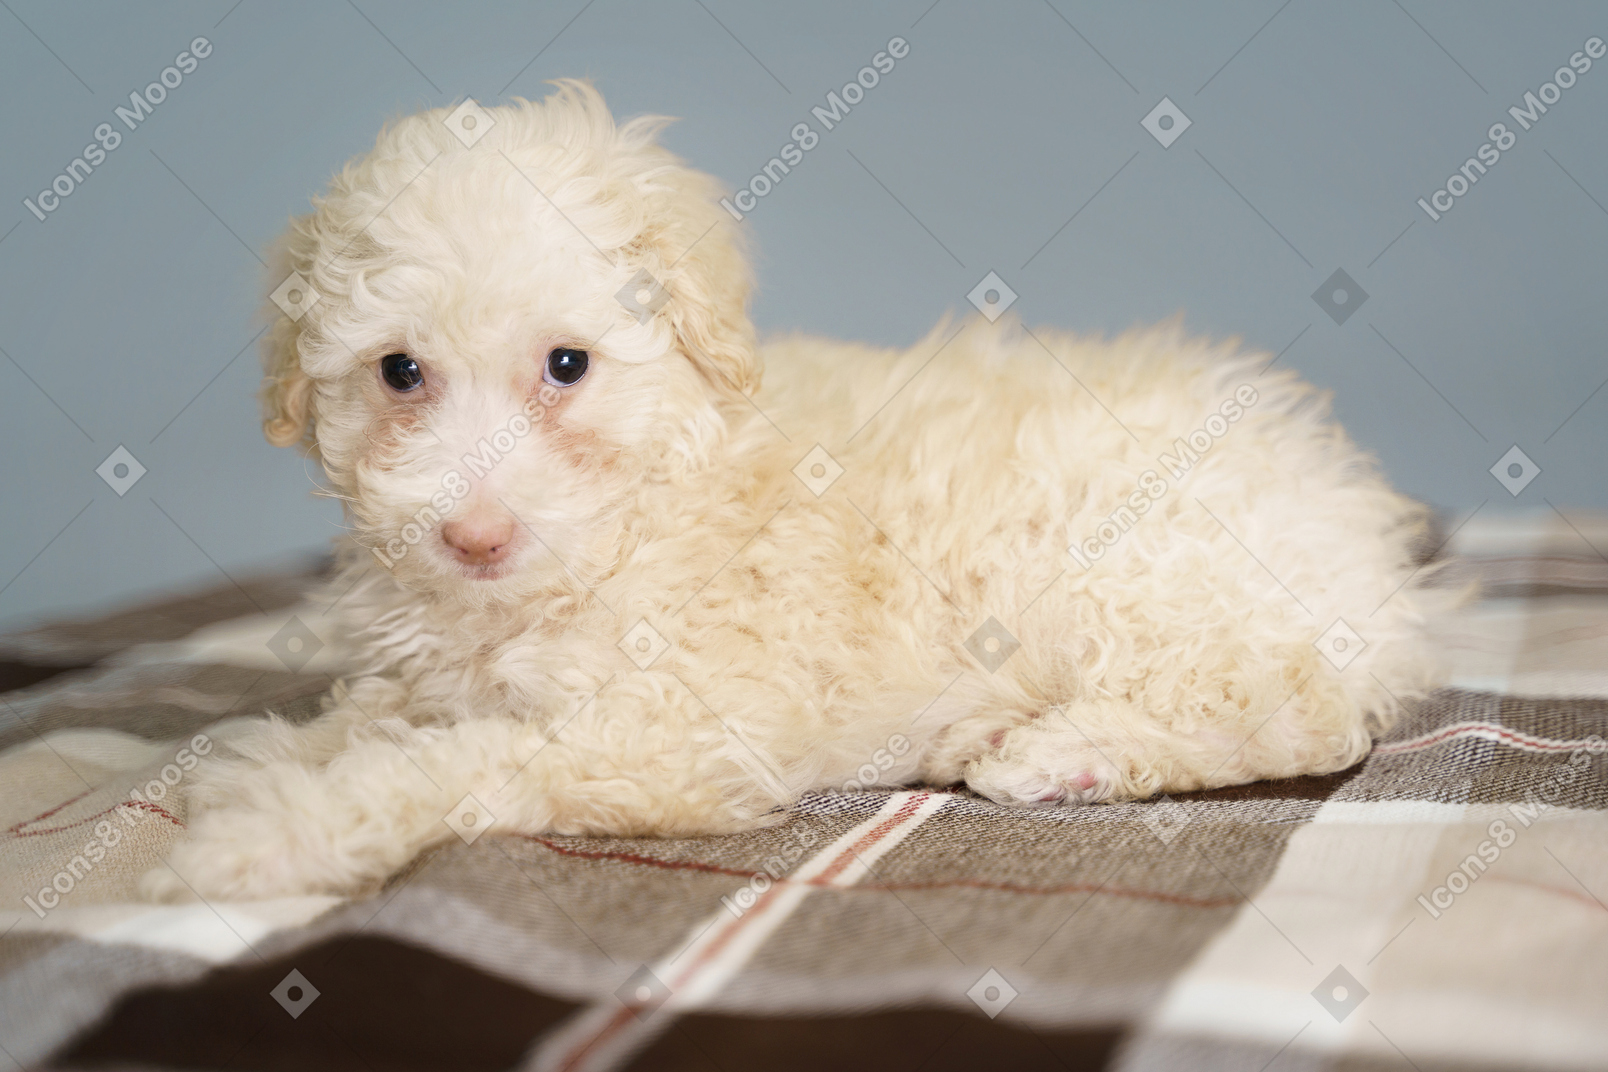 Three-quarter view of a tiny puppy lying on a checked blanket and looking at camera